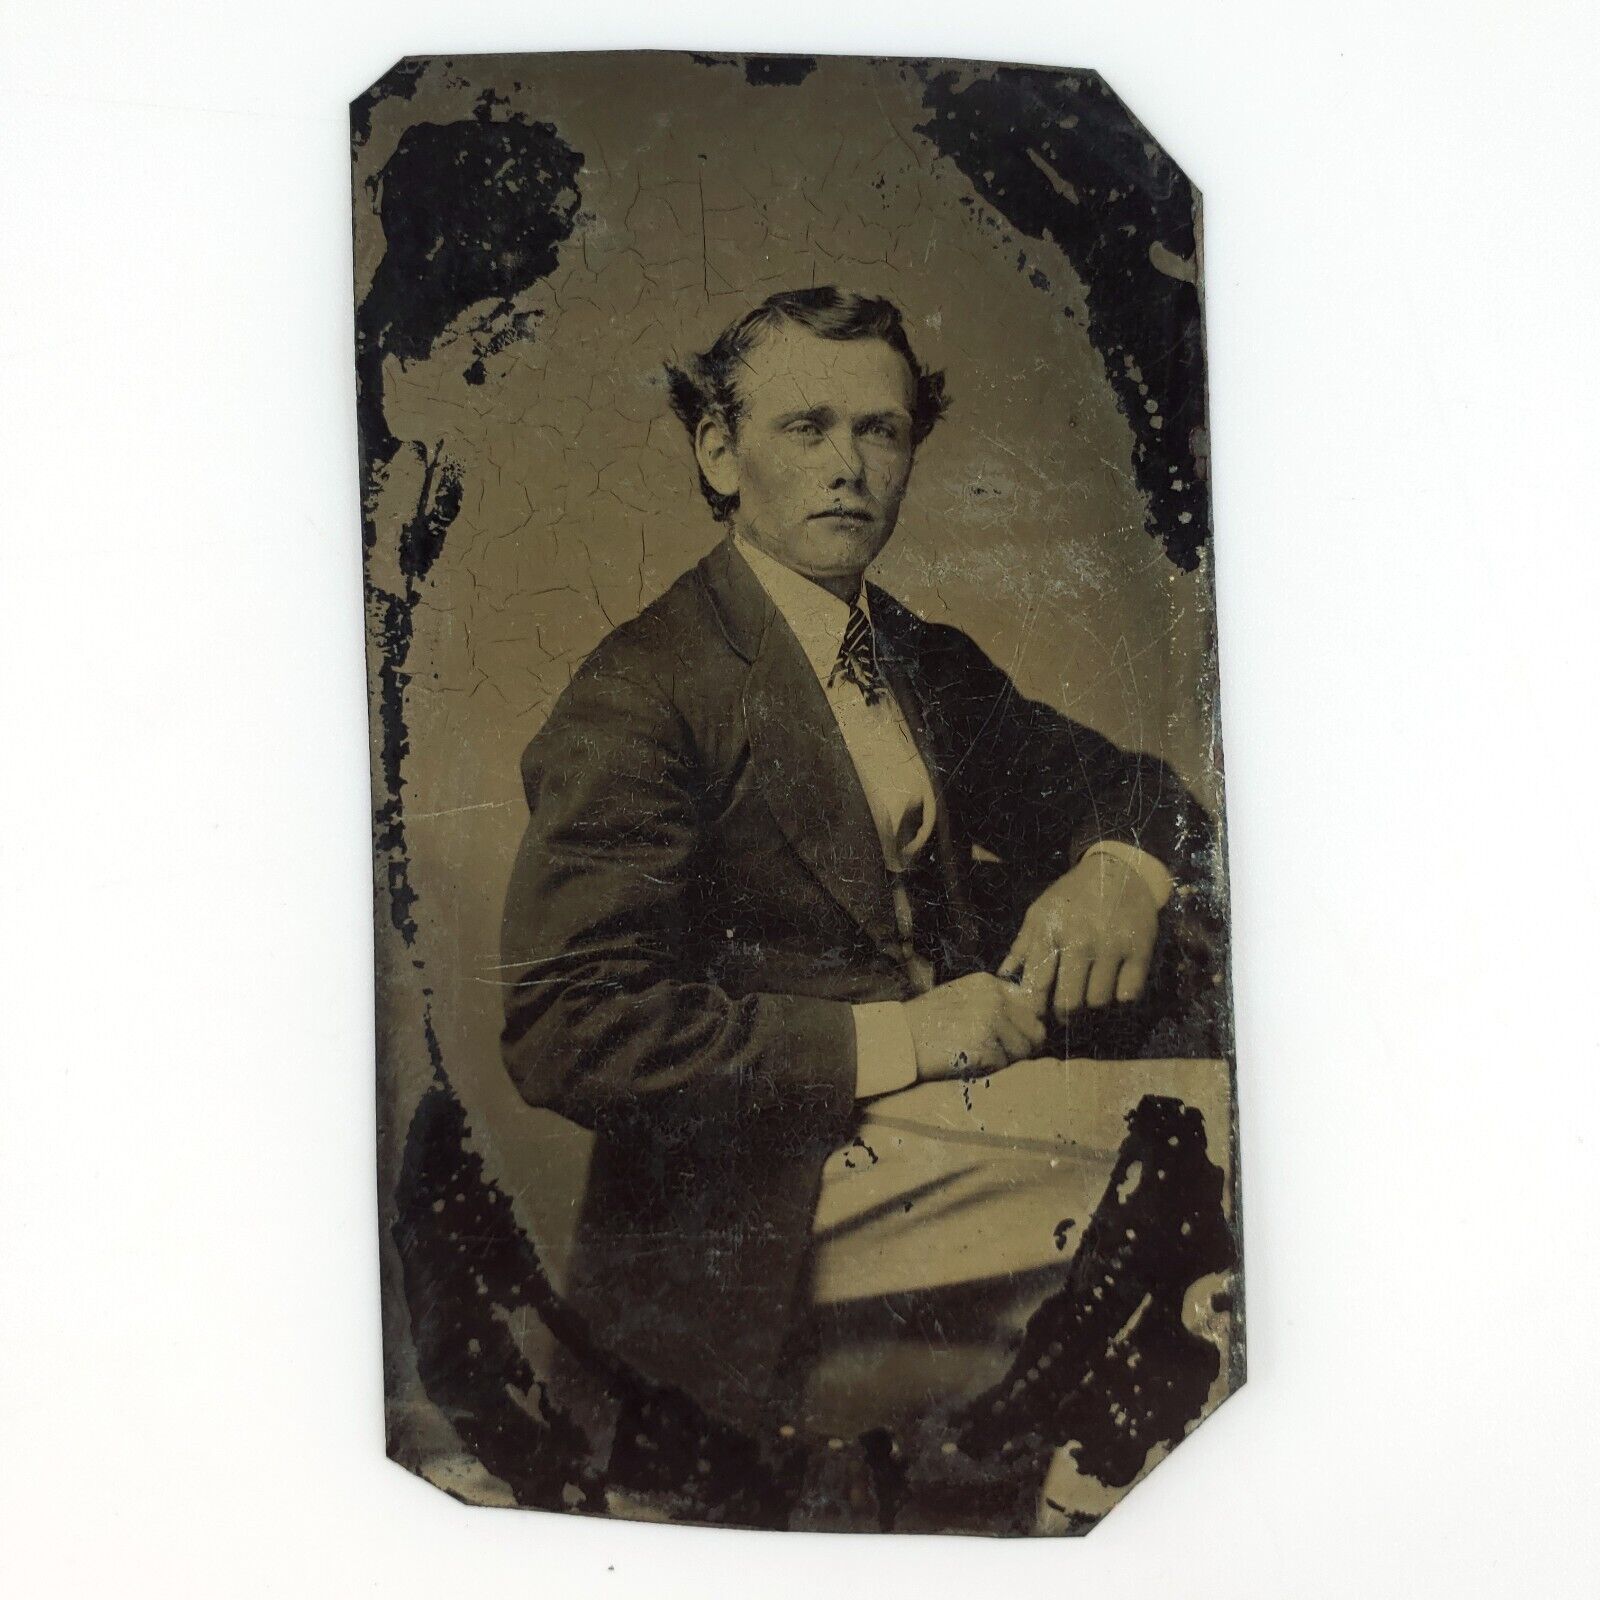 Revealed Young Handsome Man Tintype c1870 Antique Sitter 1/6 Plate Photo A3609